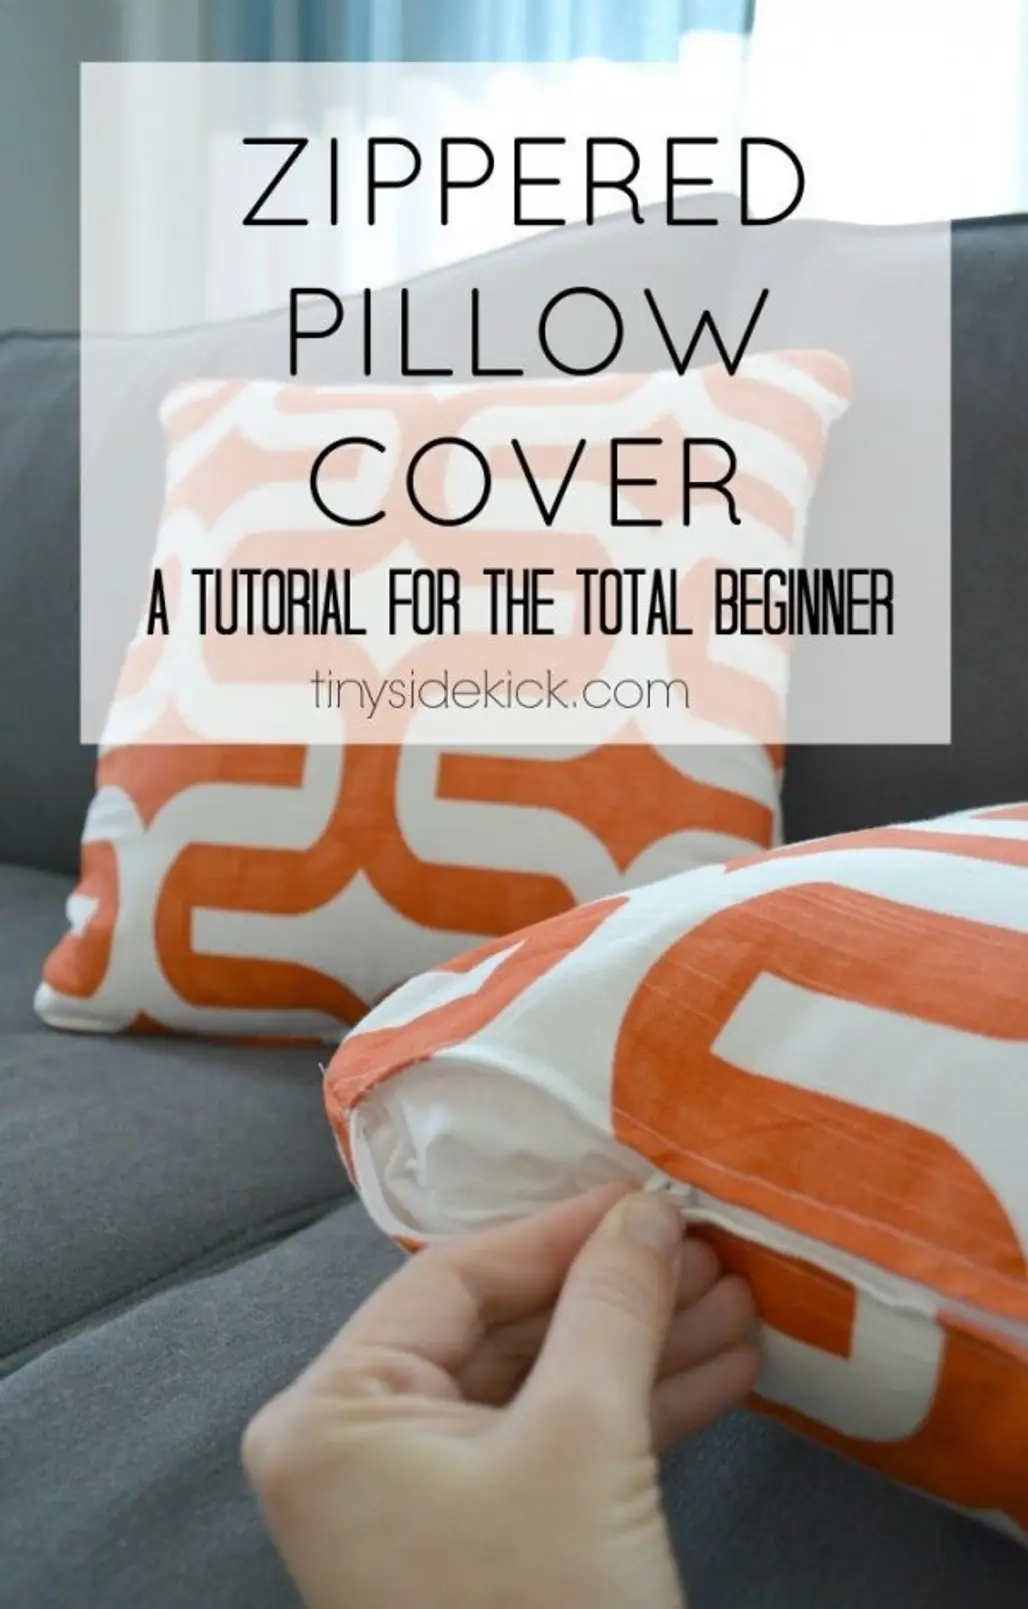 How to Make a Zippered Pillow Cover